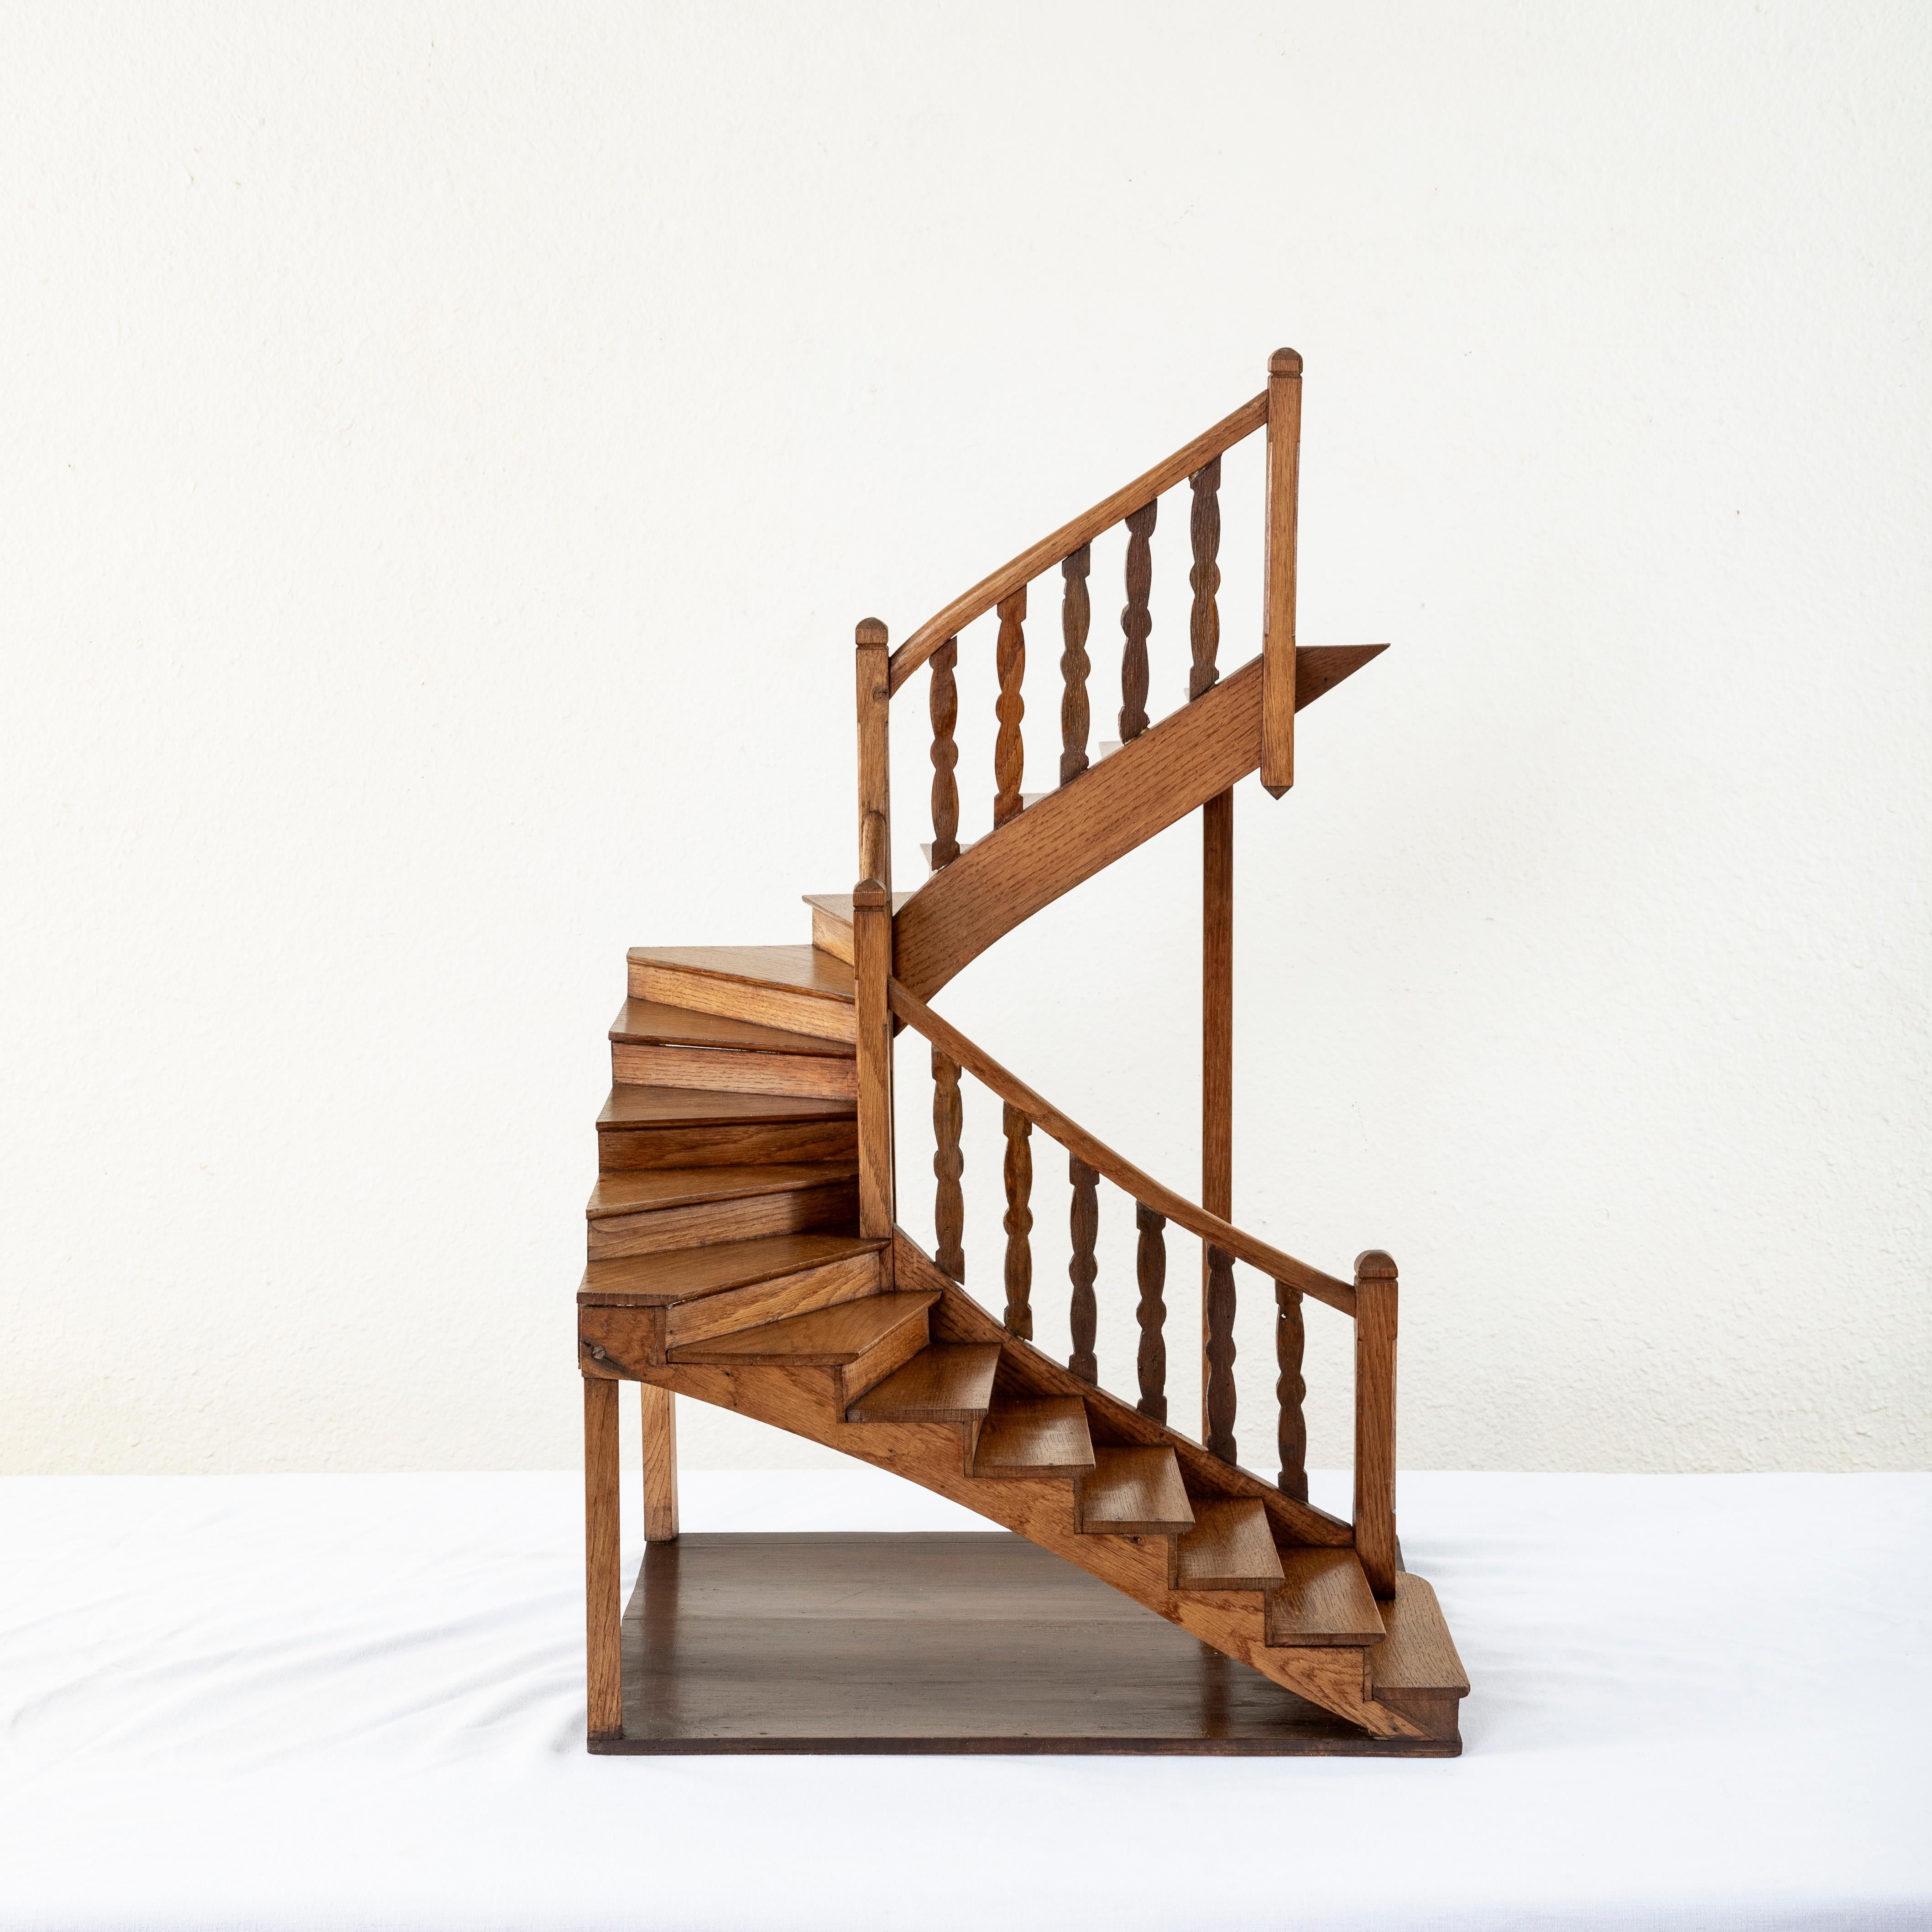 This solid oak French model staircase is a rare find. Made by the architect to demonstrate the full scale staircase design, this unusually large-scale model from the early twentieth century displays beautifully on its own as a centerpiece for an